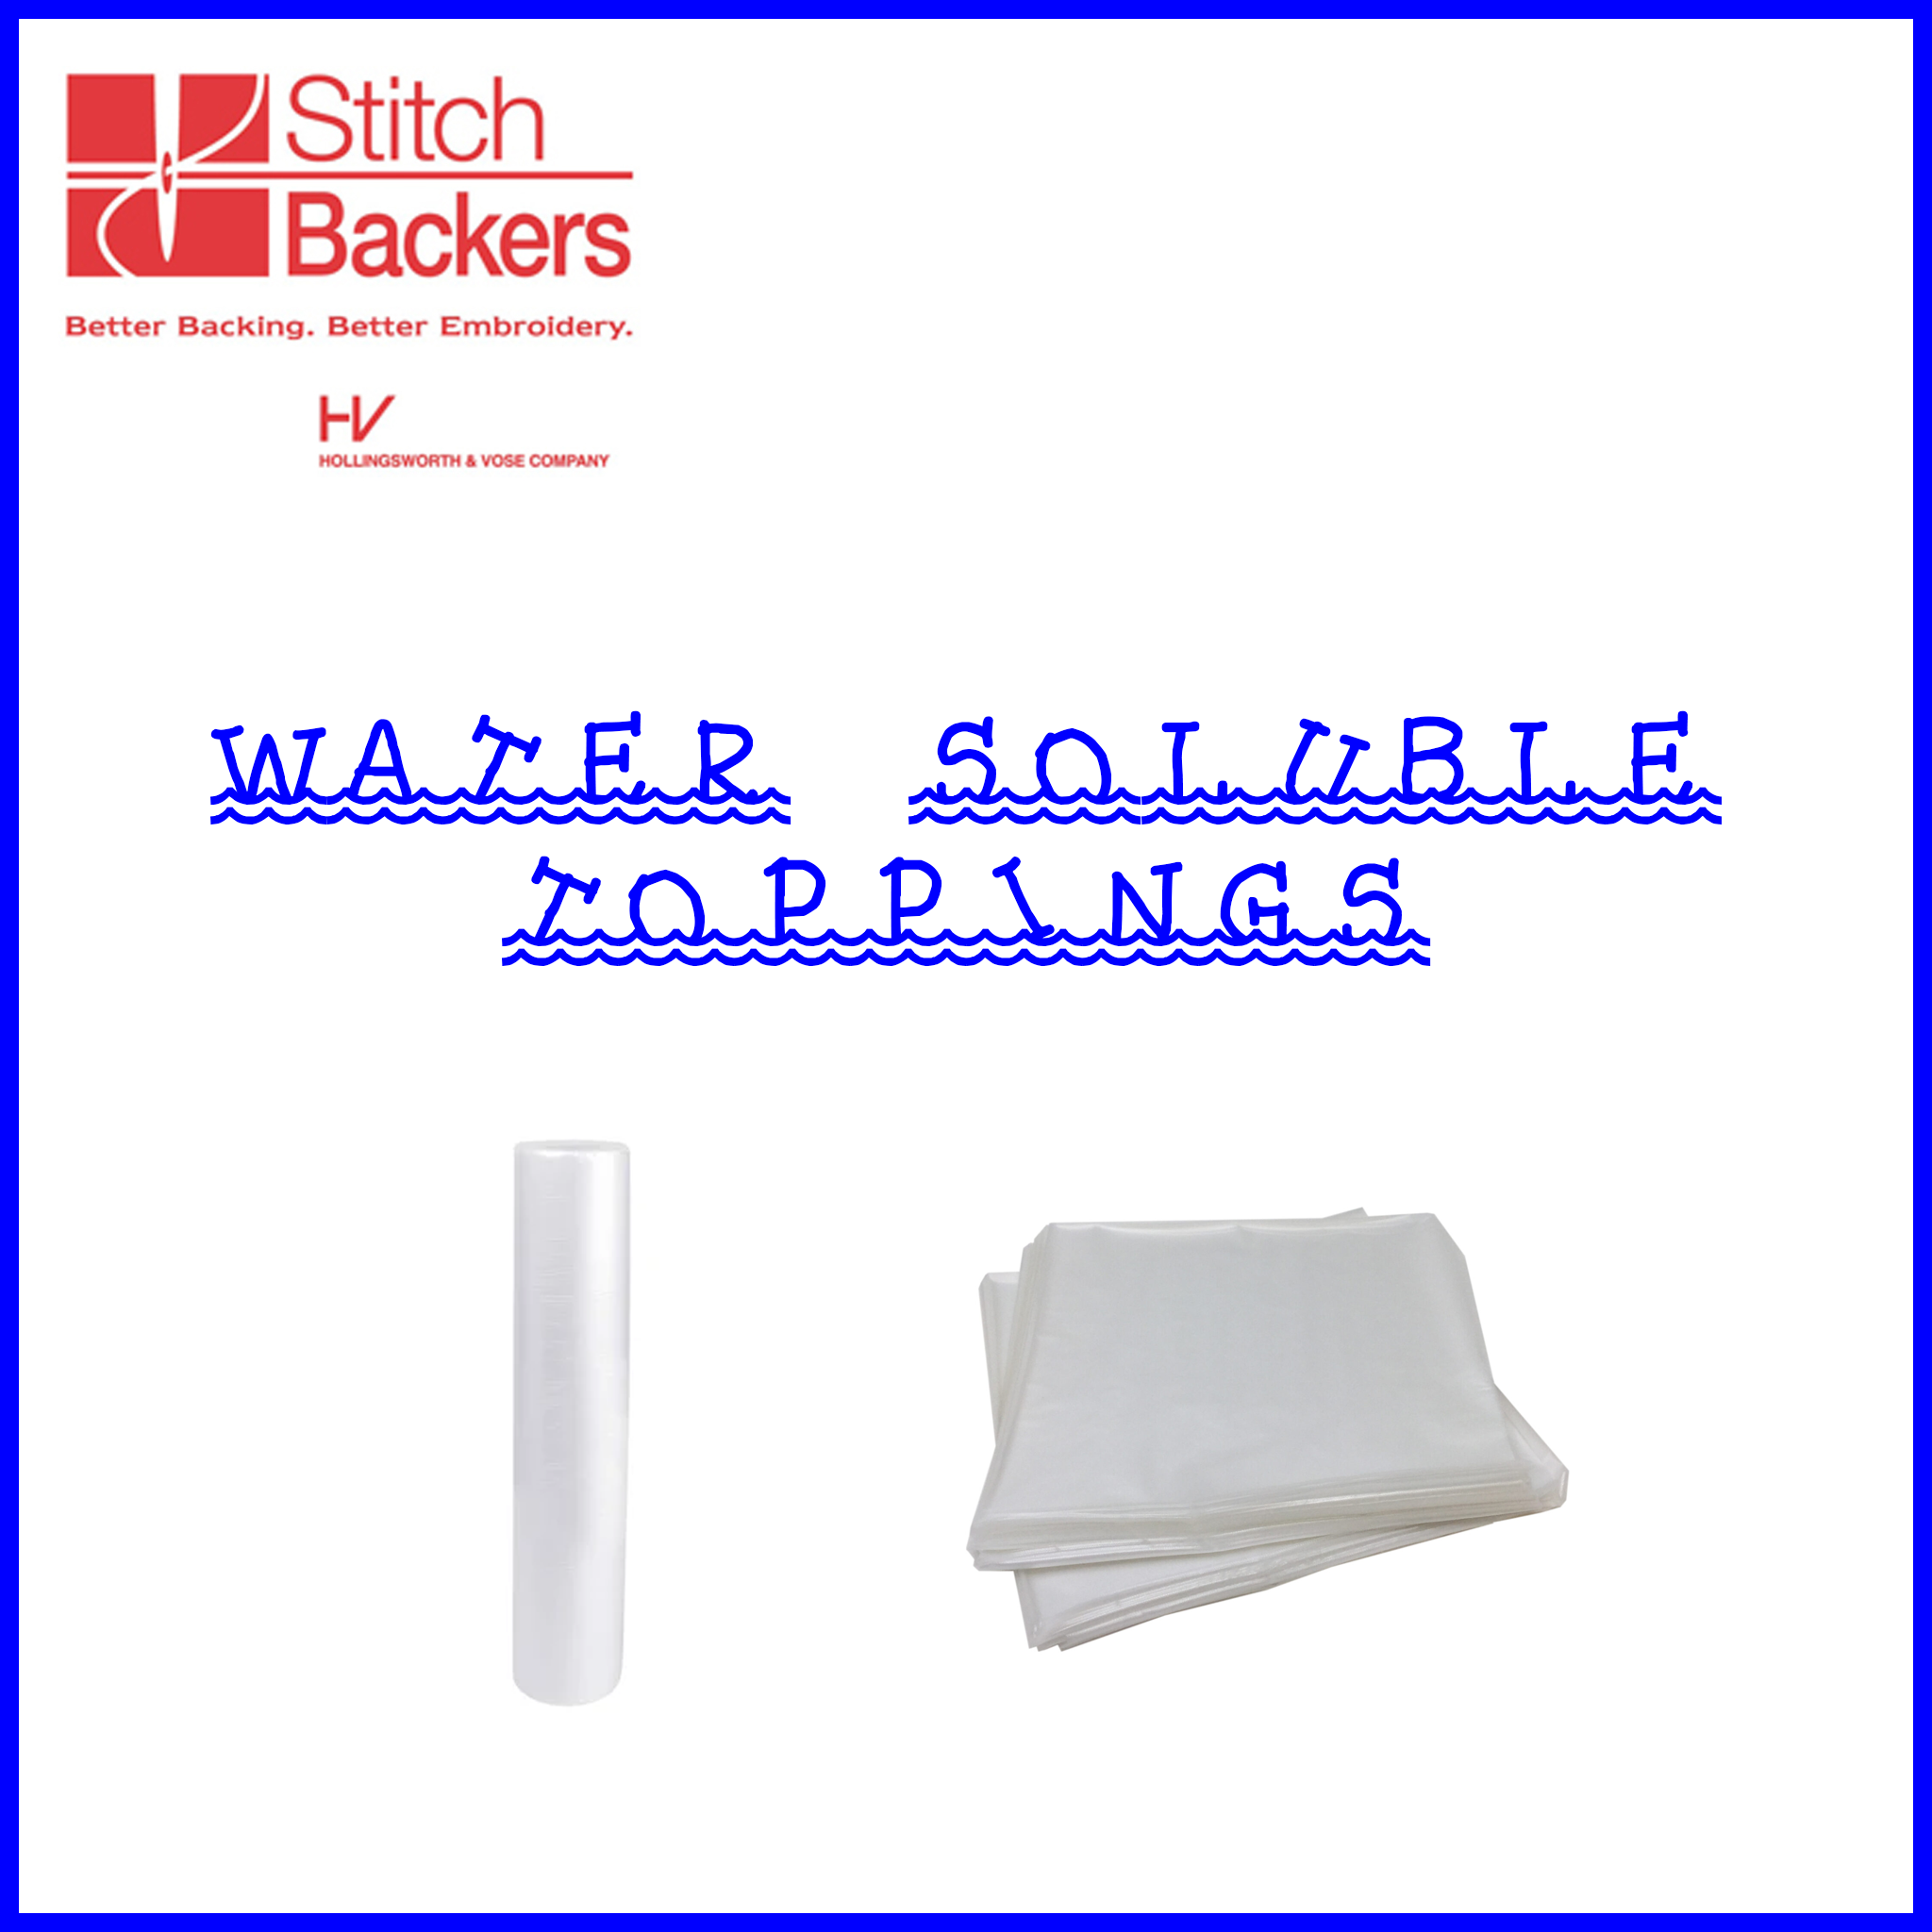 Water Soluble Topping - Floriani